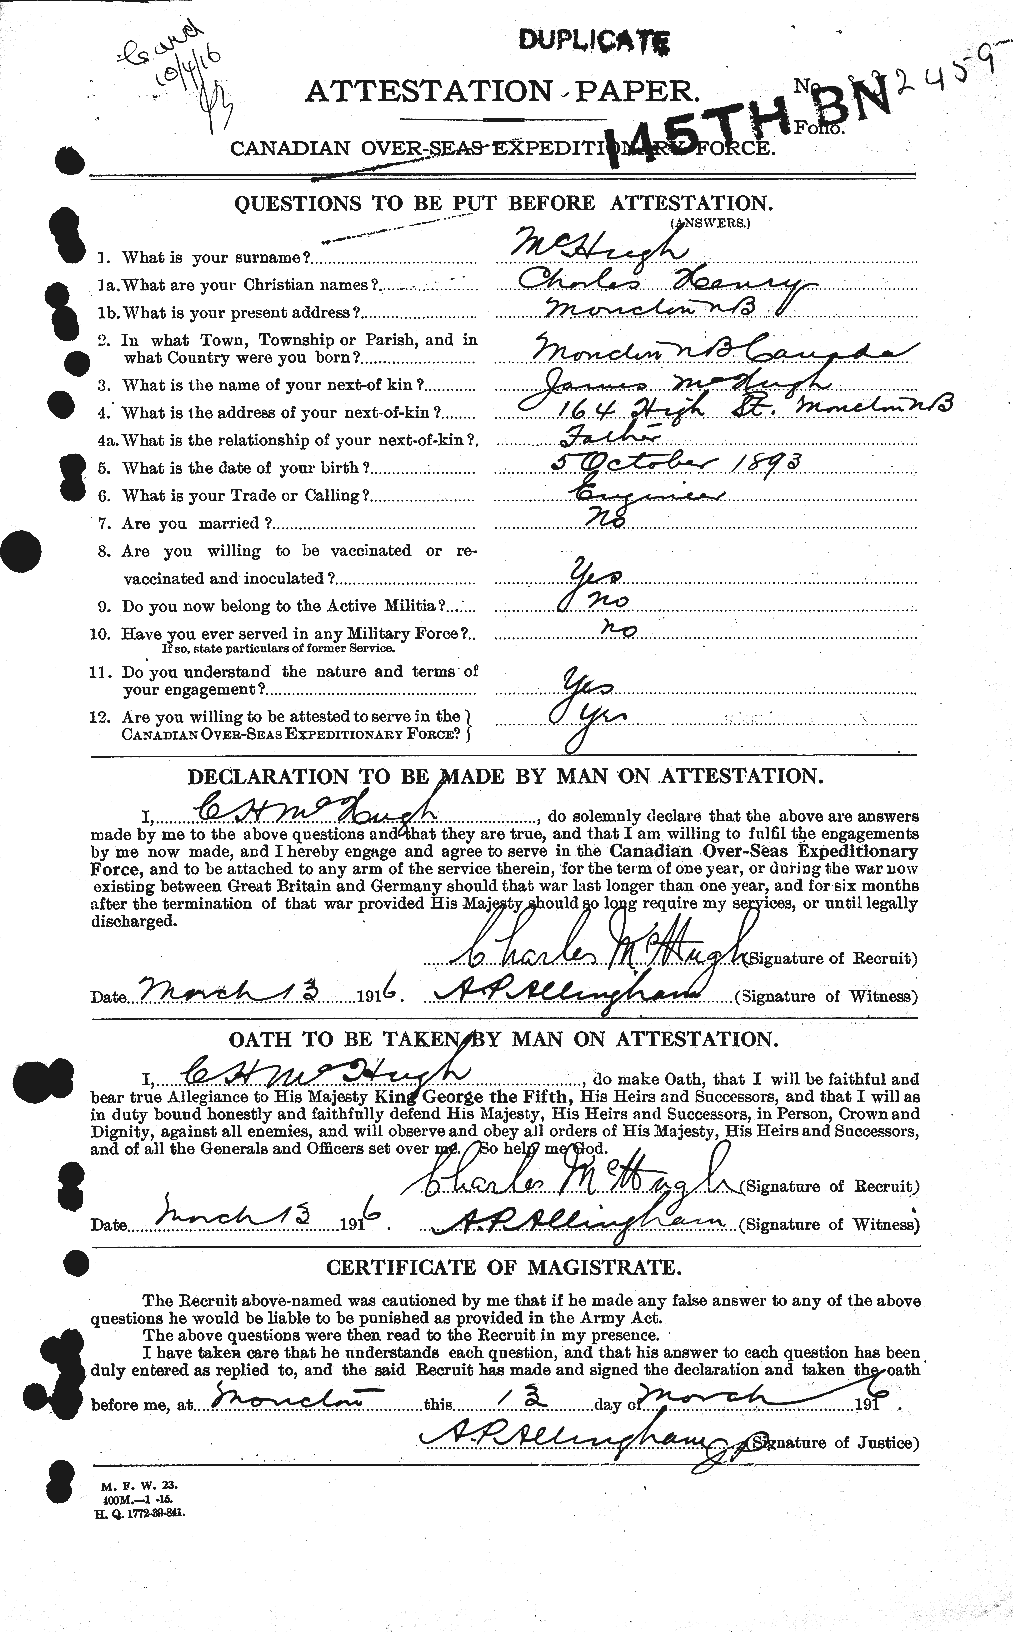 Personnel Records of the First World War - CEF 524318a